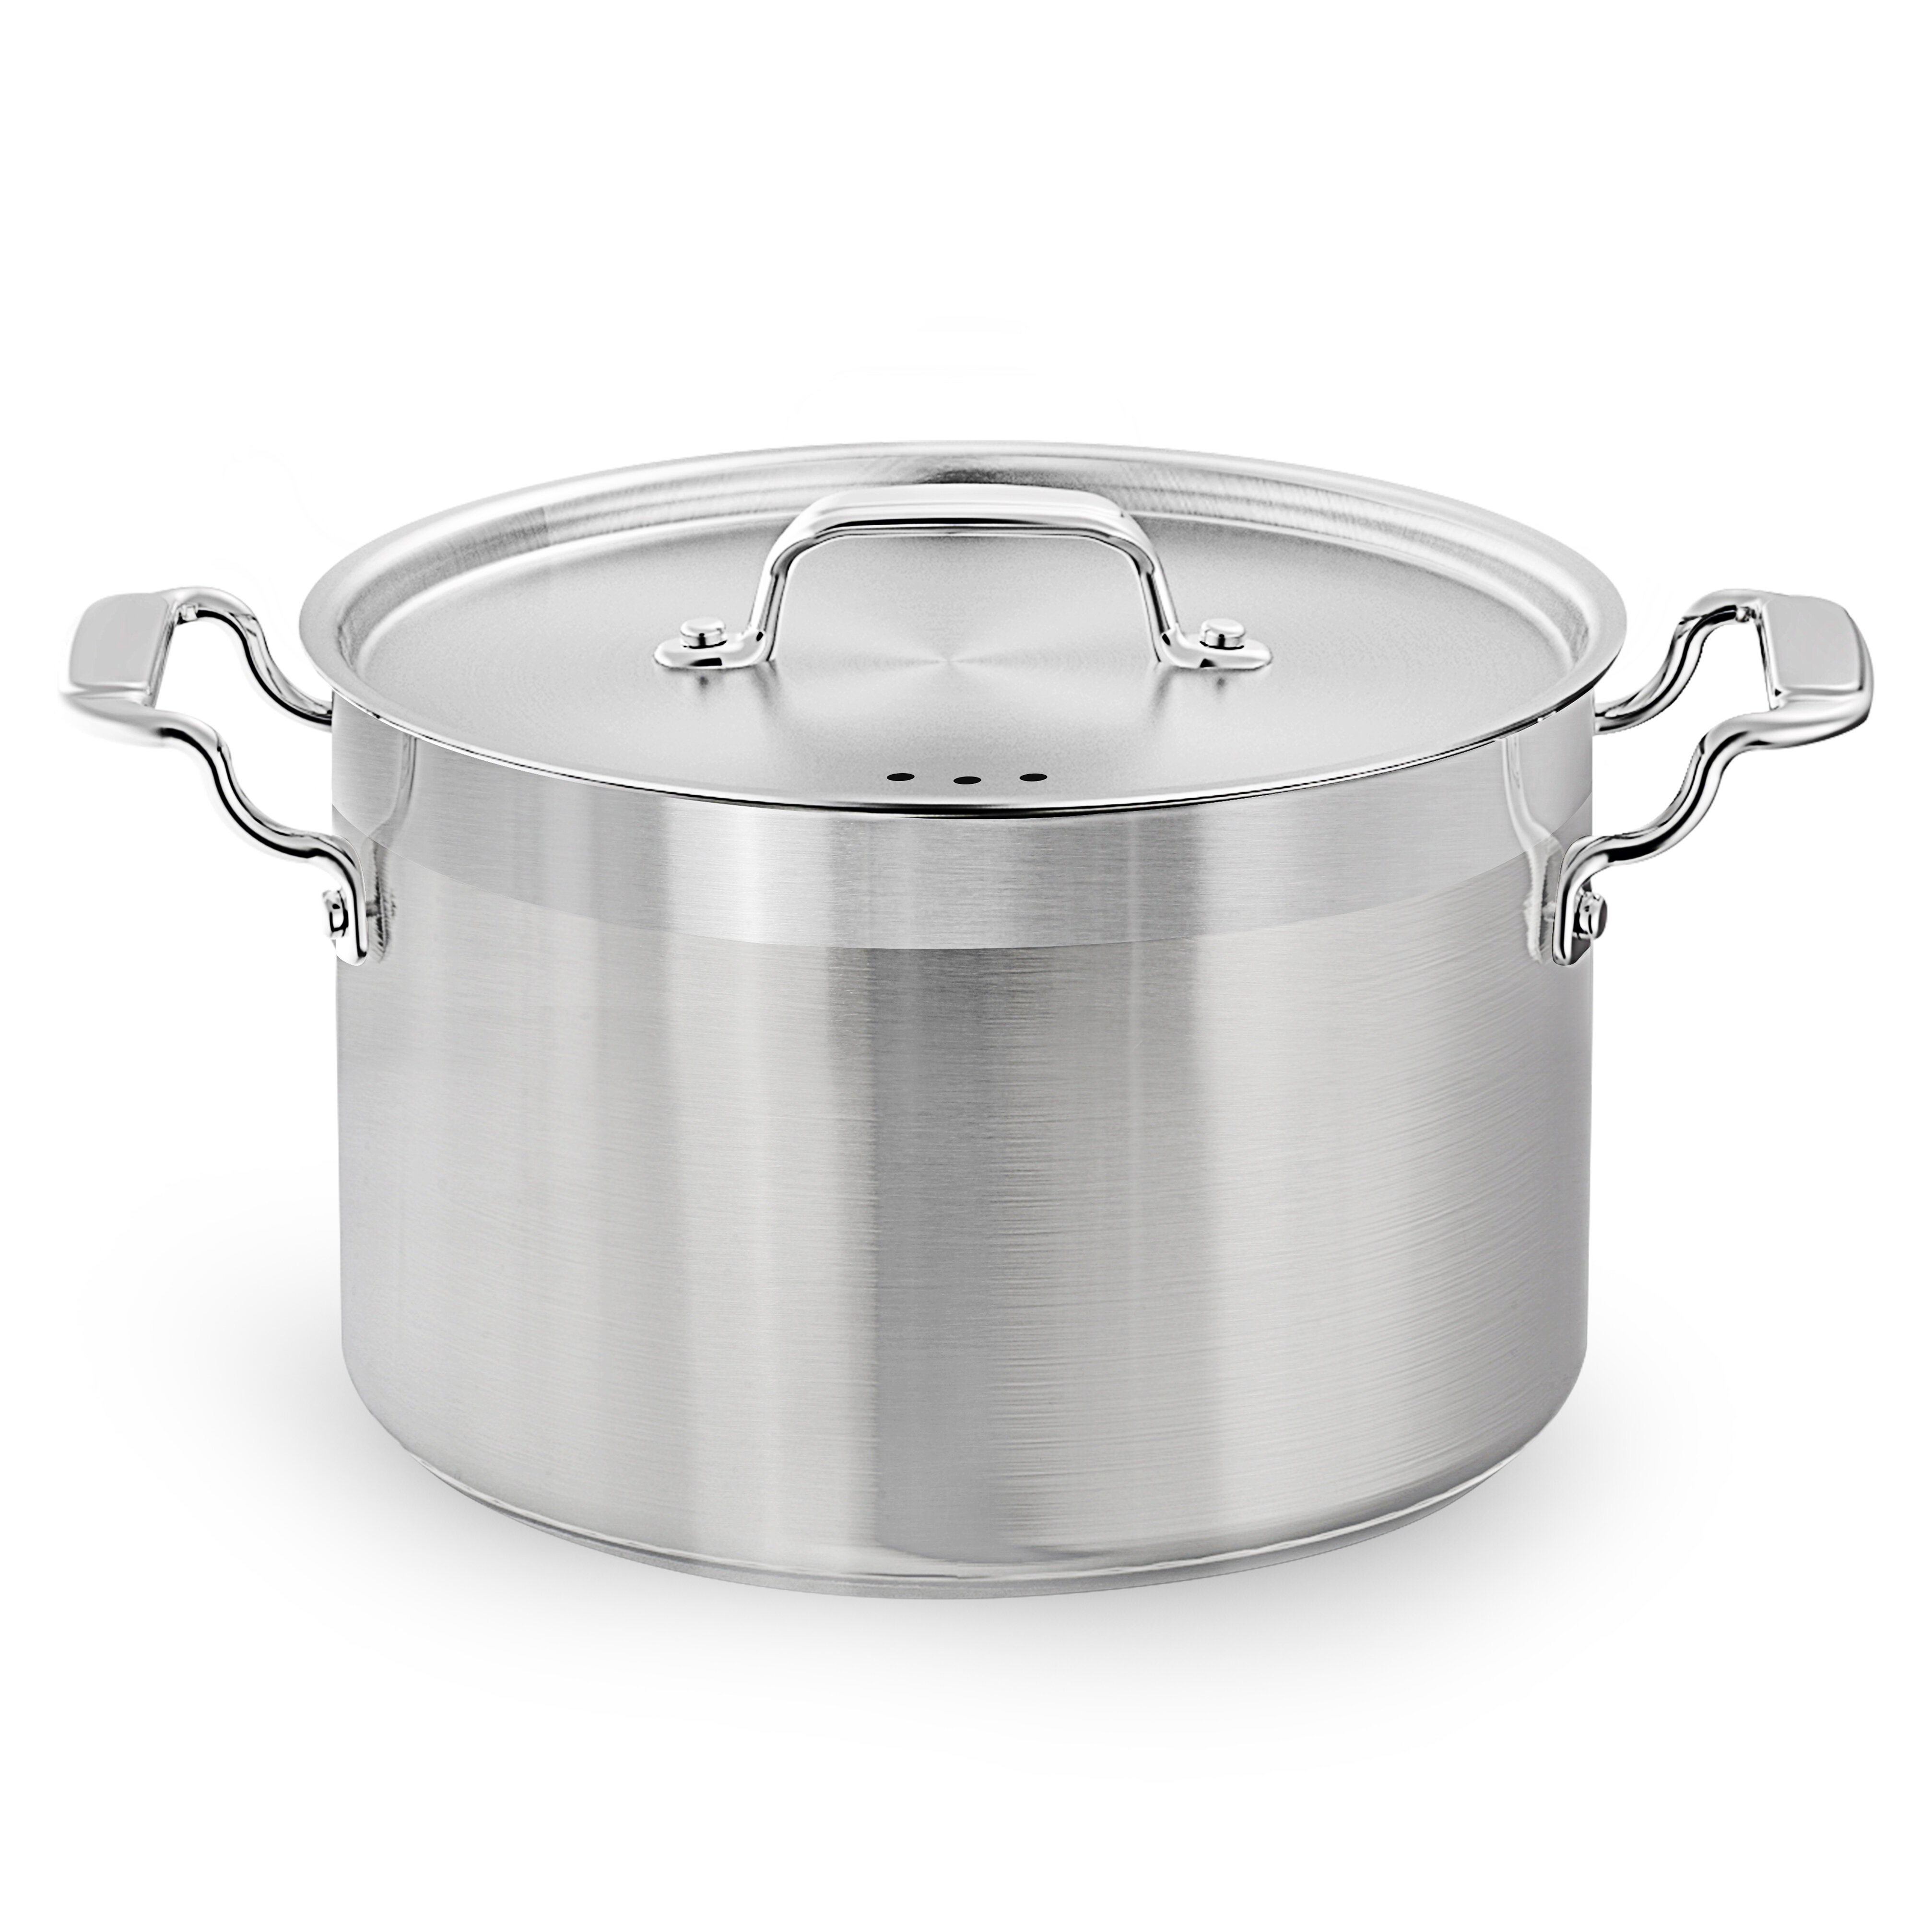 Stainless Steel Dutch Oven, 5-Quart, Matte Black,Free Shipping